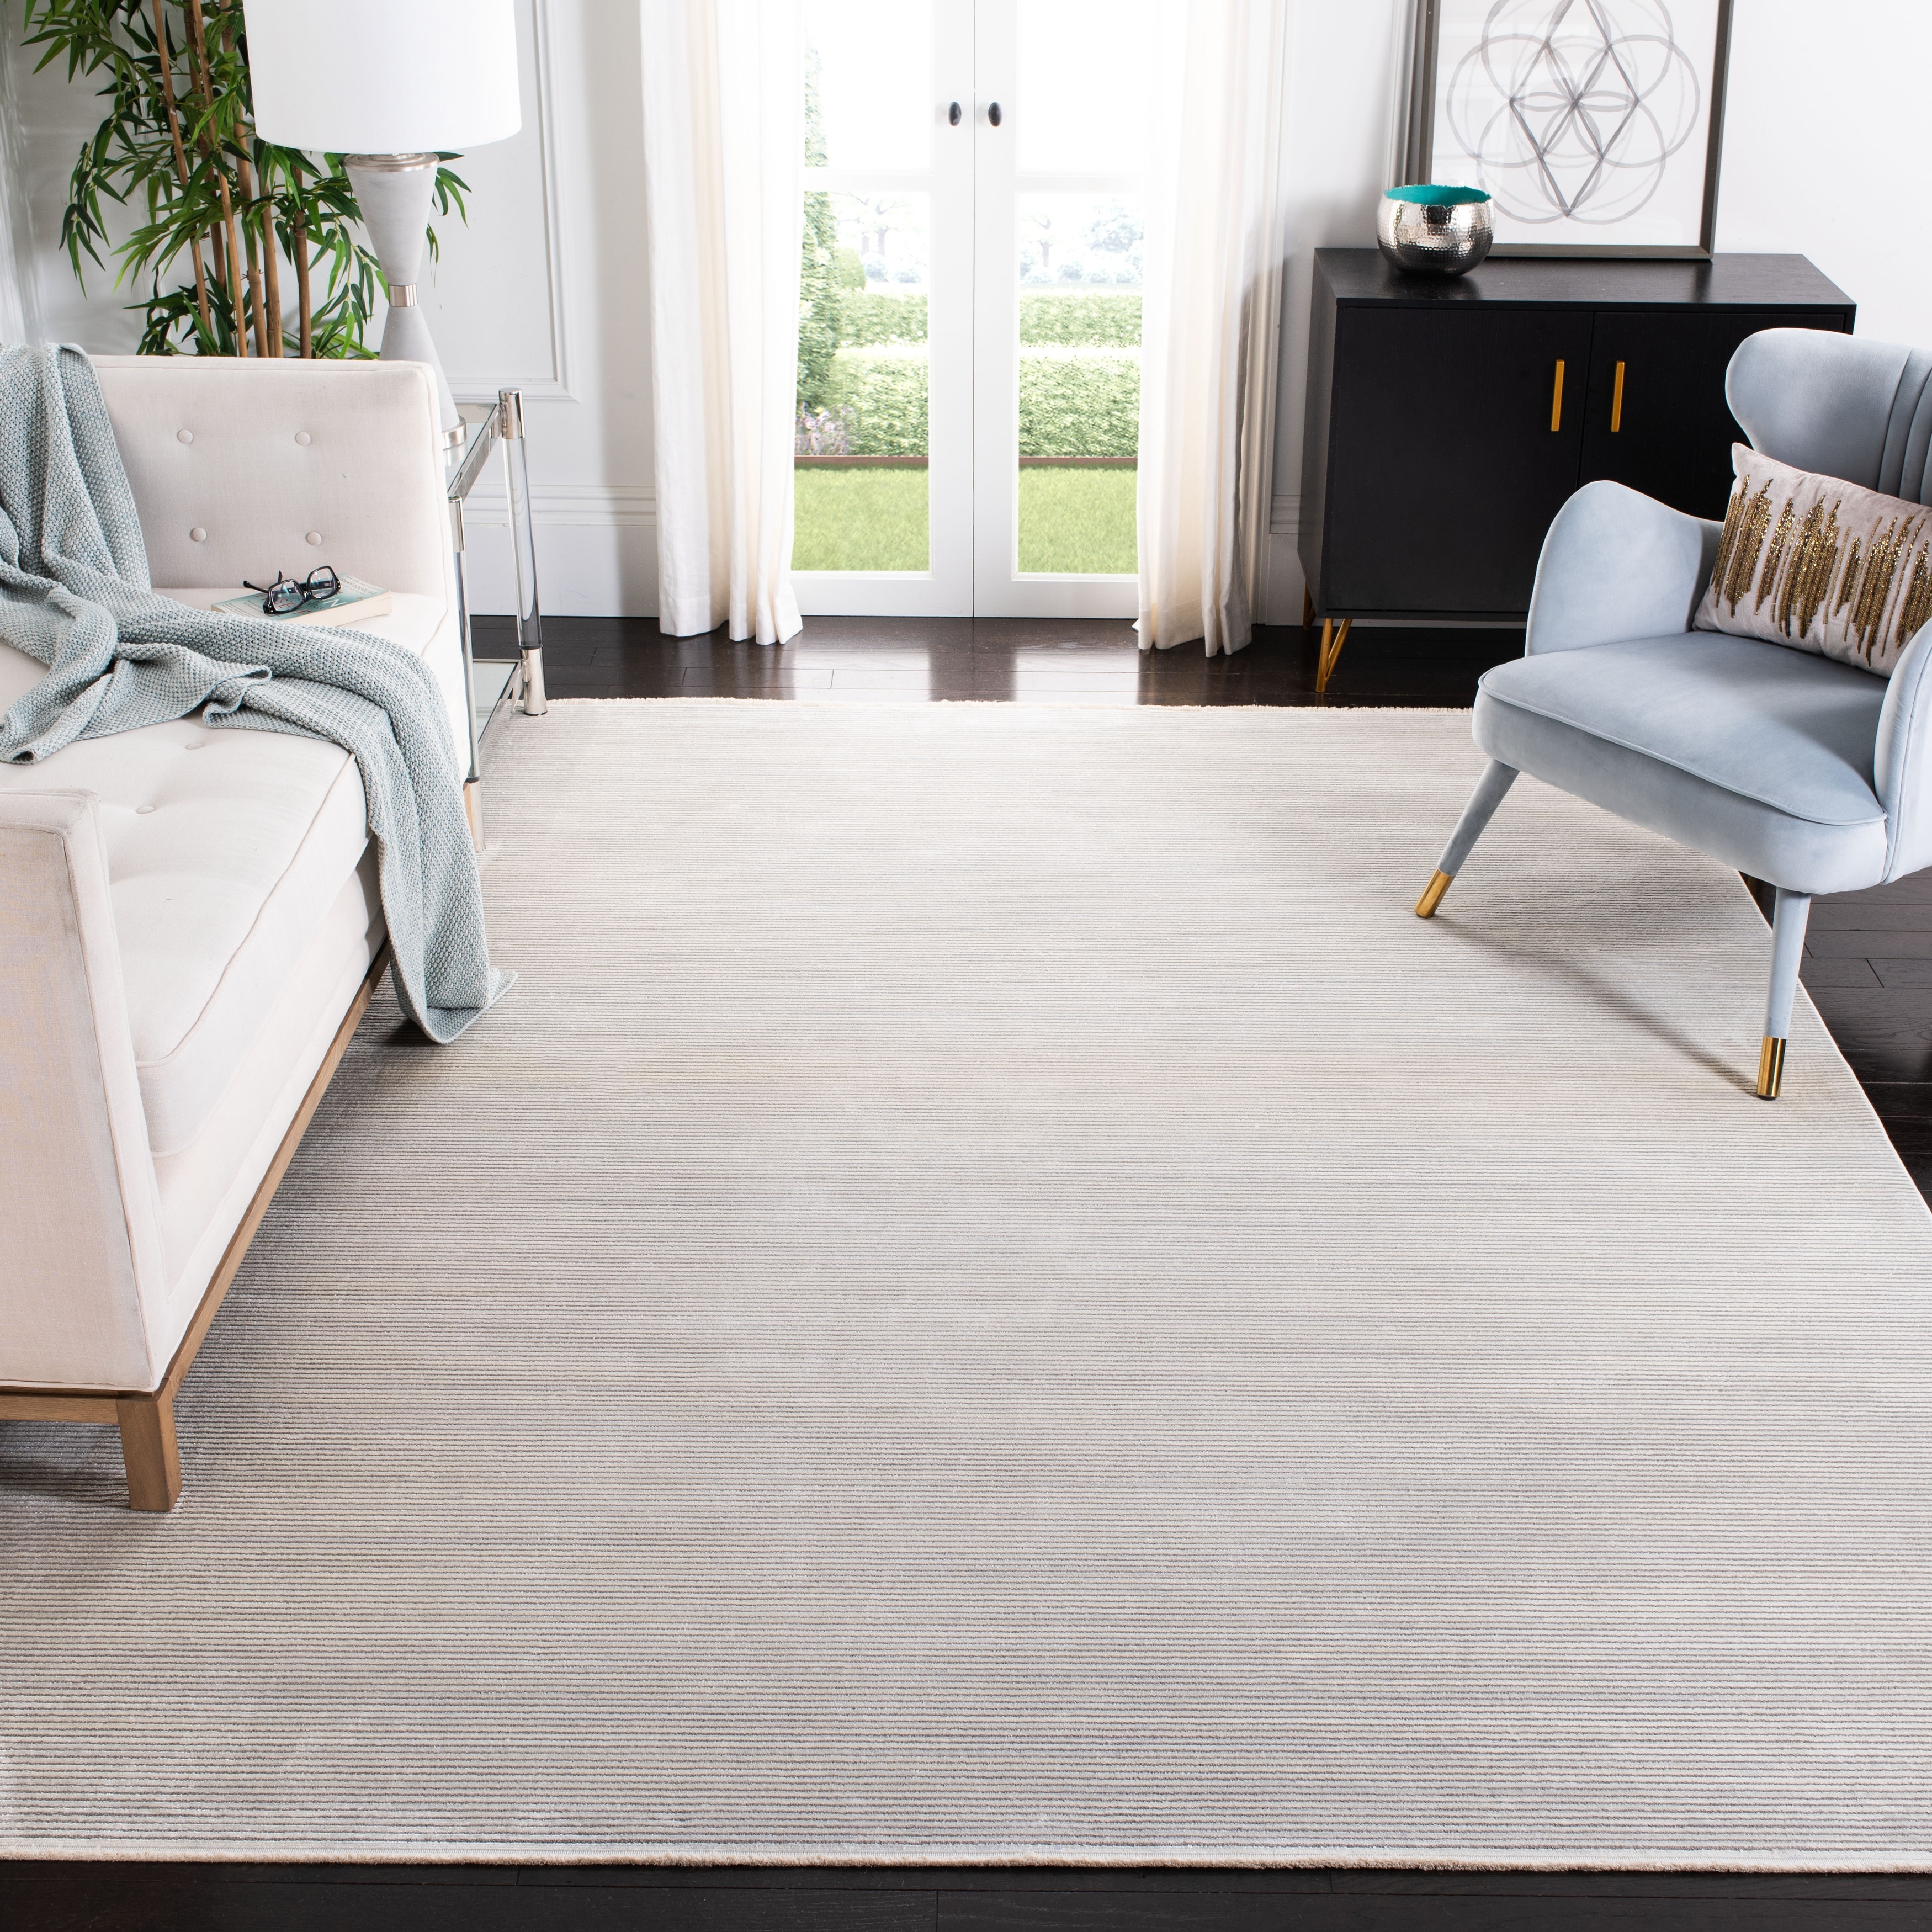 SAFAVIEH Dream Collection DRM472F Modern Ombre Premium Viscose Living Room Dining Bedroom Area Rug 6'7 x 6'7 Square Grey/Ivory 